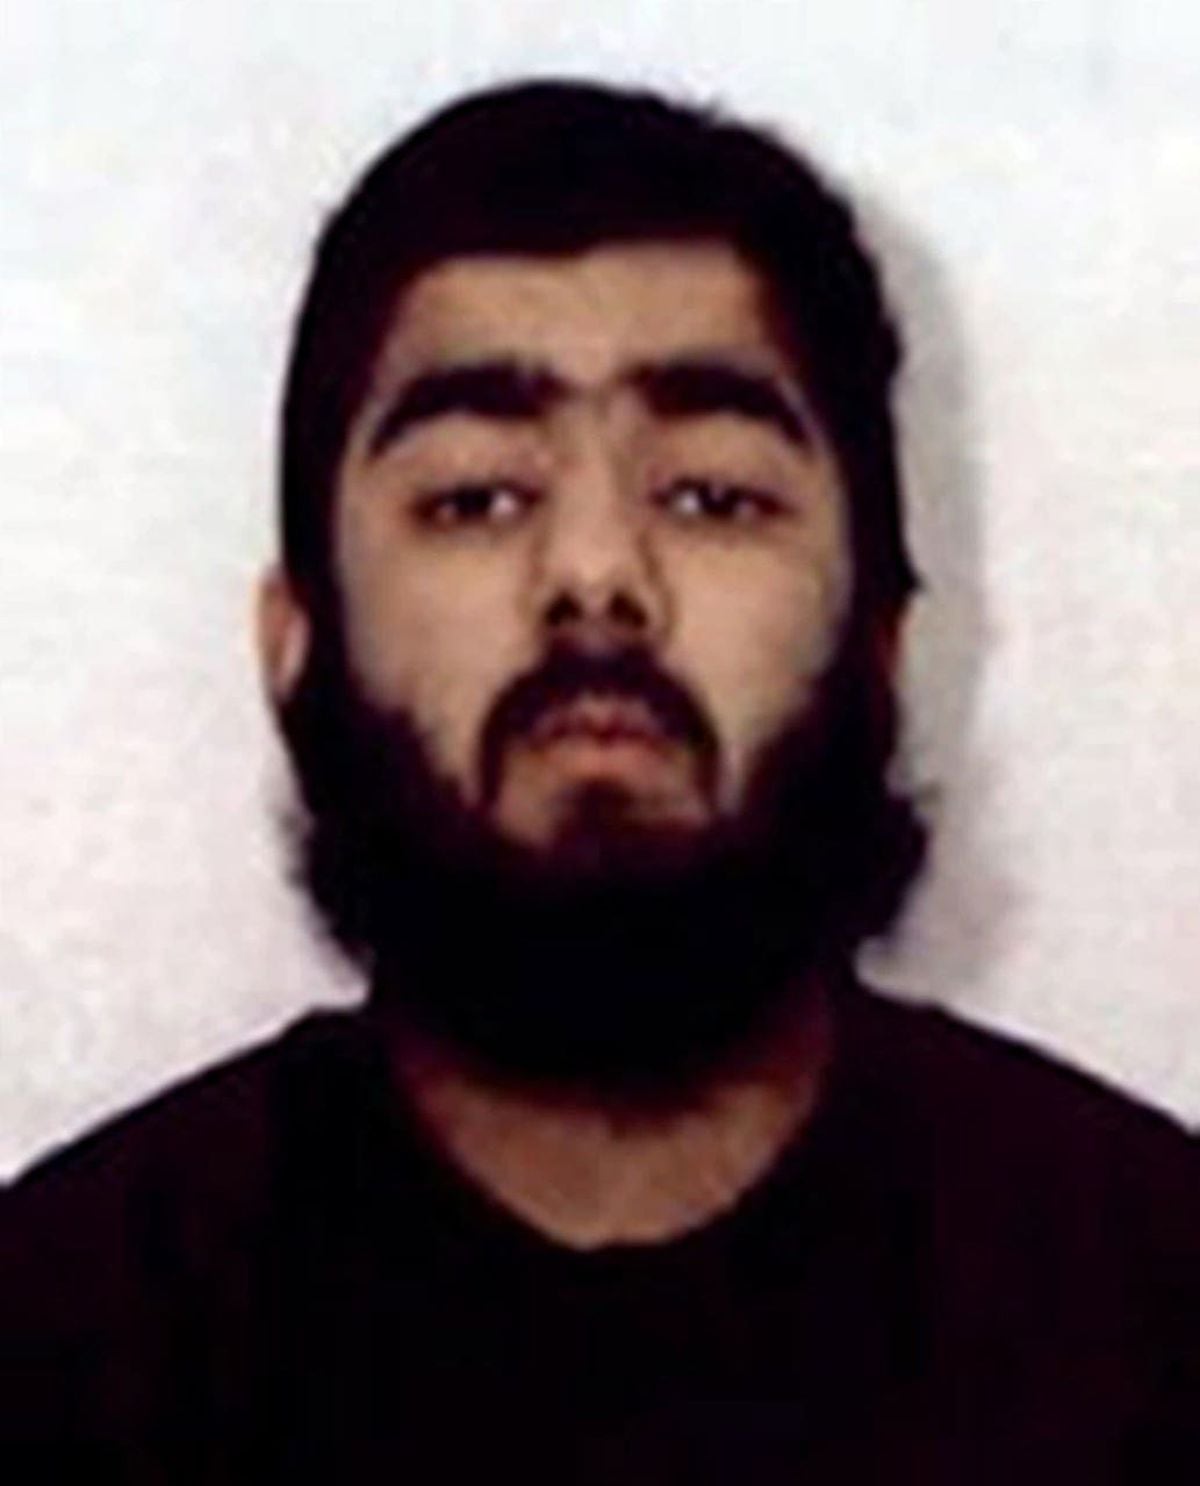 Usman Khan was attending a prisoner education programme before the attack